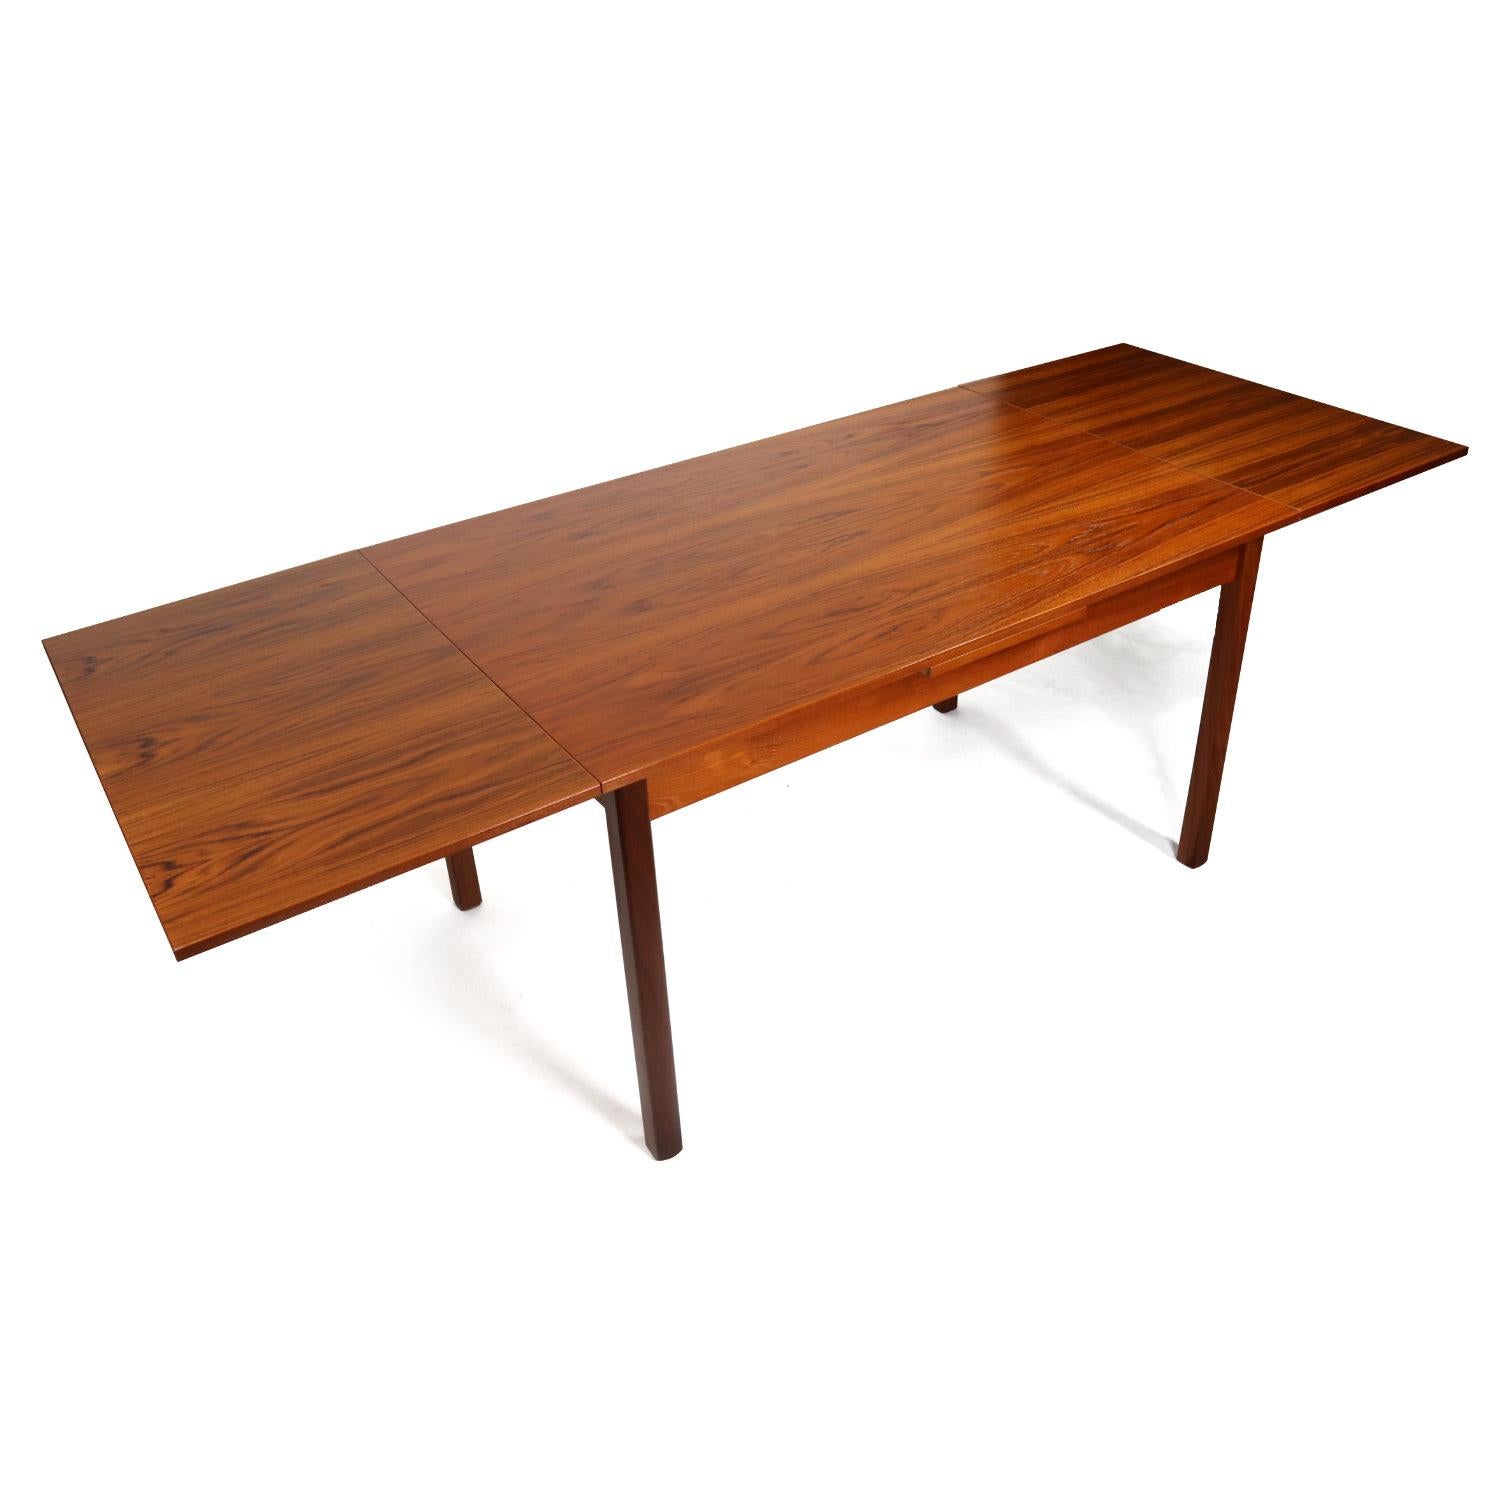 Outstanding original condition BRDR Furbo Danish teak dining table. It’s rare that we find dining tables in such great original condition since they are used and abused daily. Thankfully for us, the previous owner of this table was diligent with